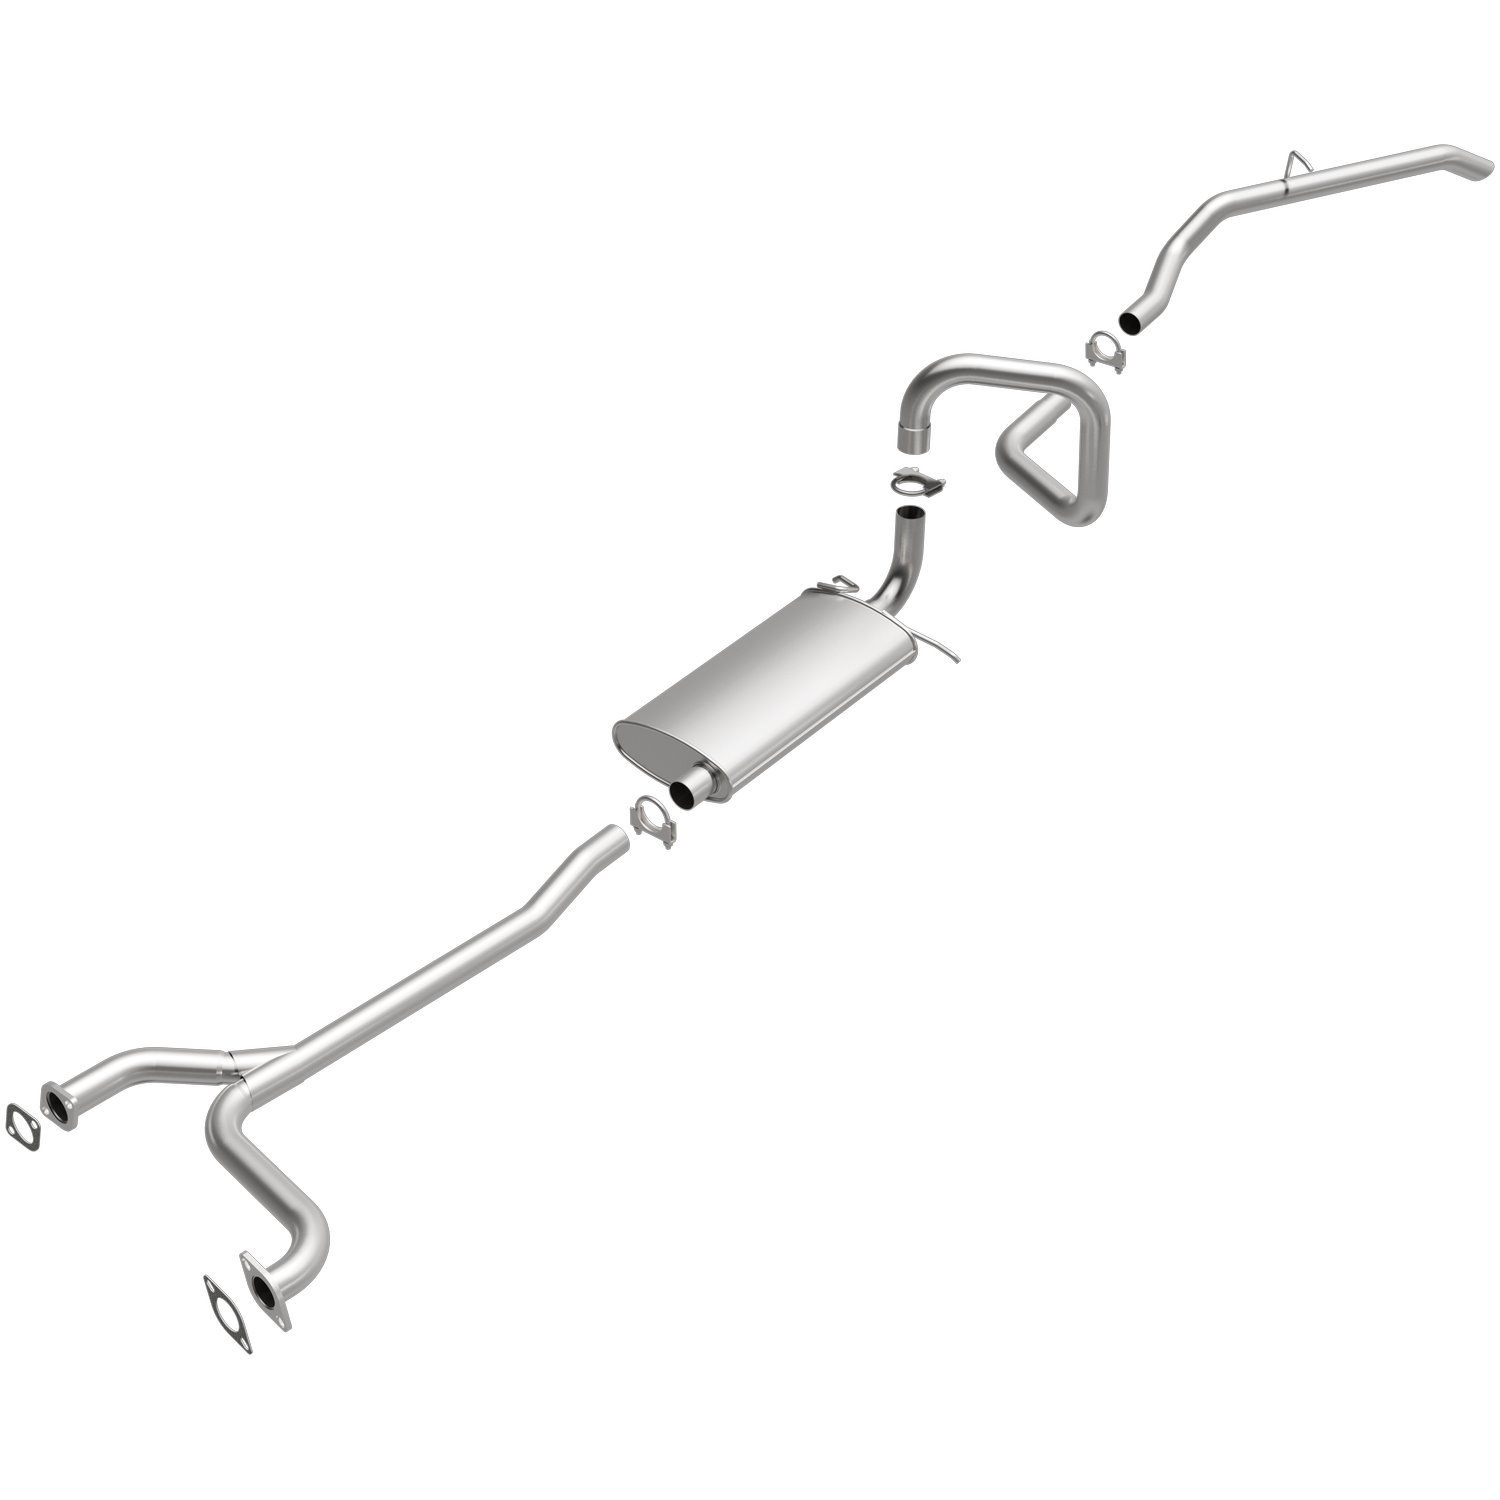 Direct-Fit Exhaust Kit, 1998-2002 Ford Crown Vic, Lincoln